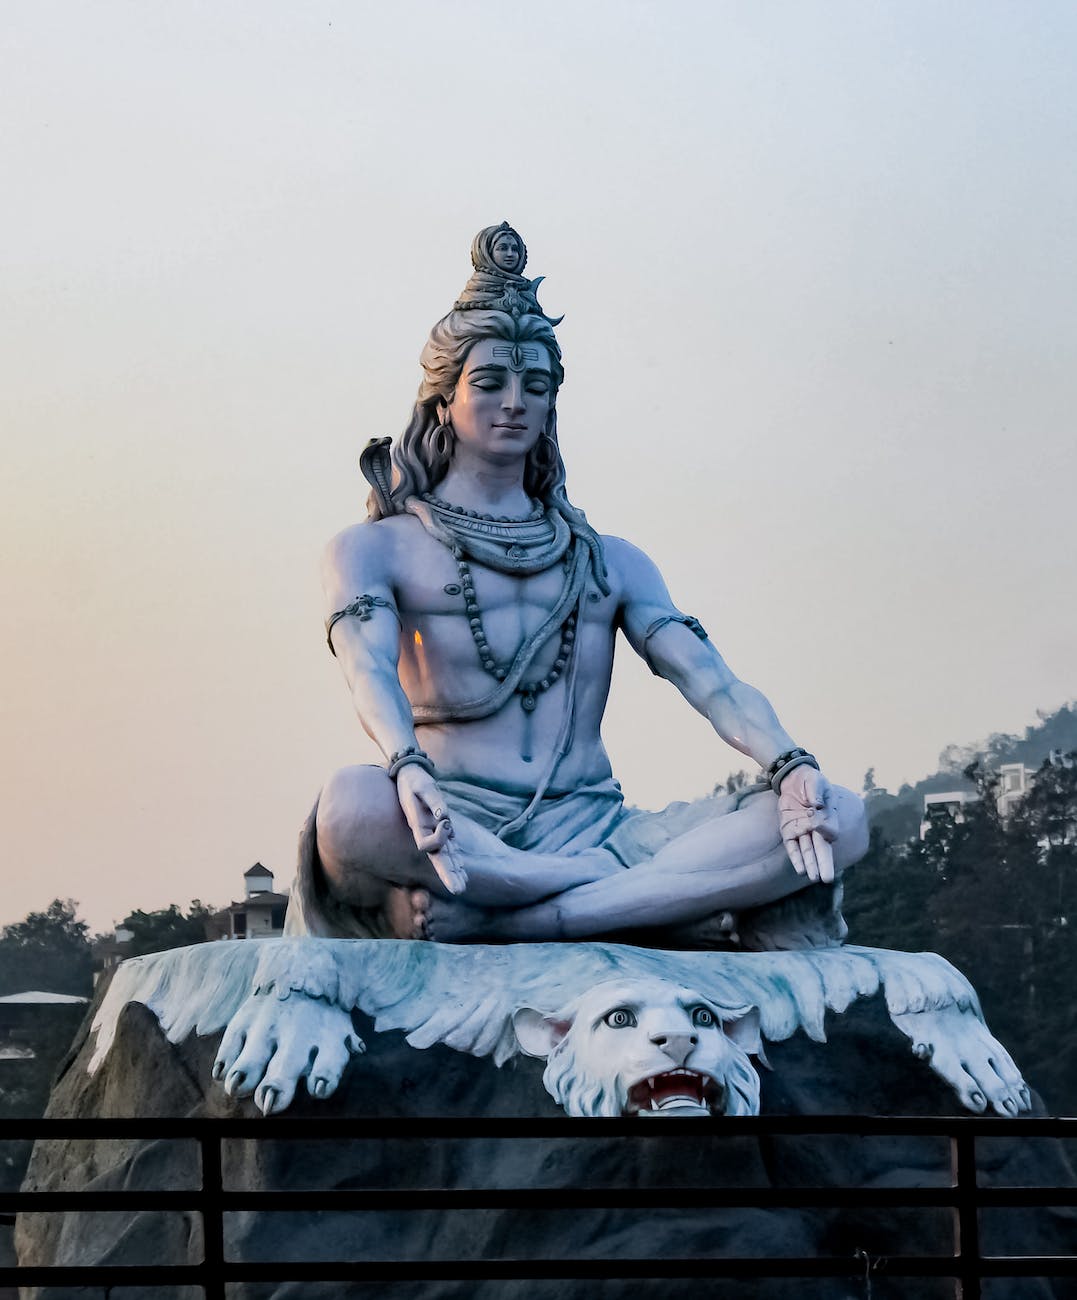 The 12 Jyotirlinga: A journey with Shiva